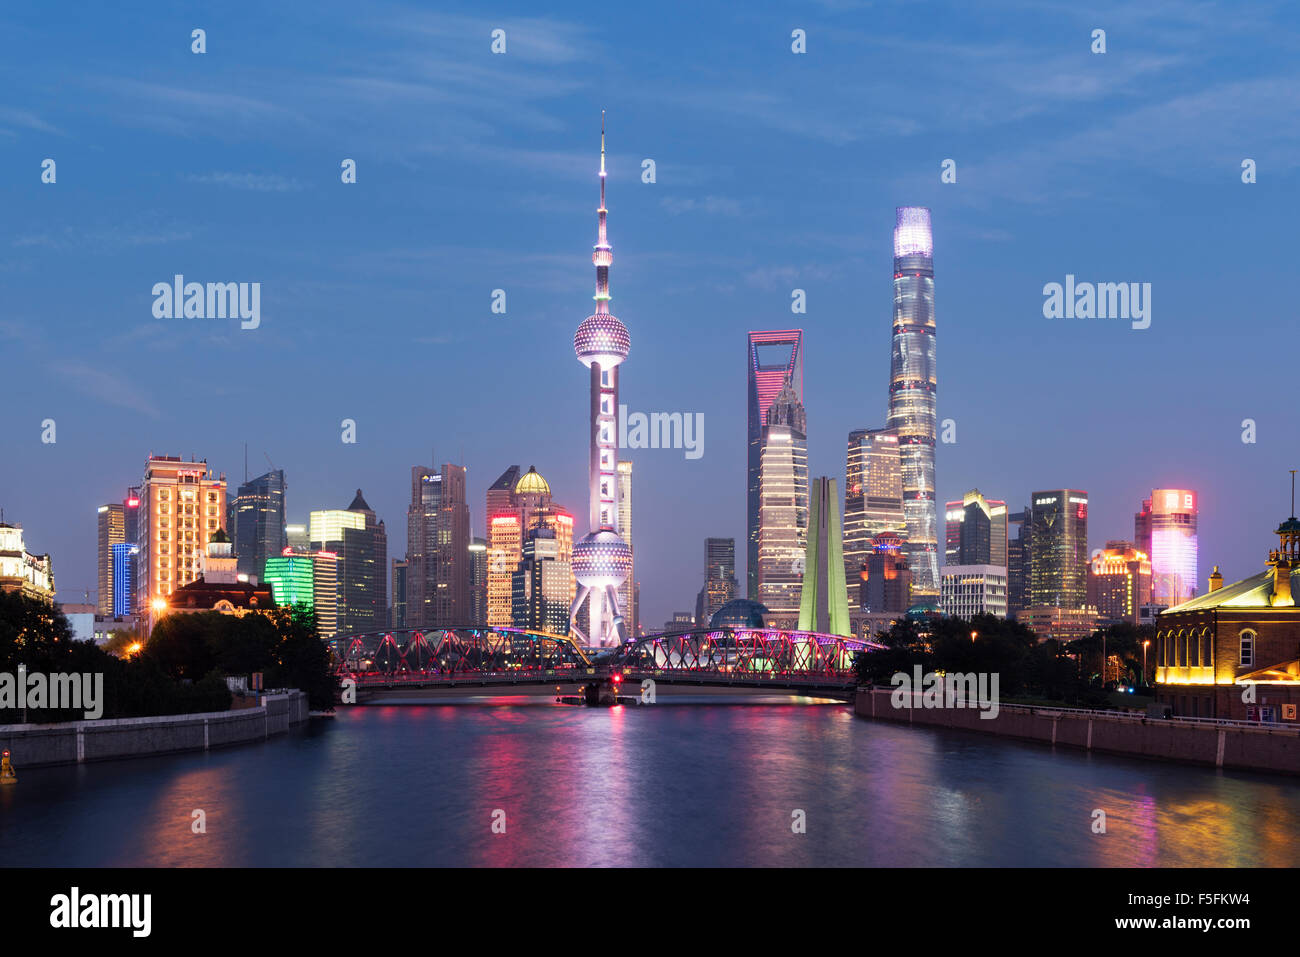 Shanghail, China - Oct 2, 2015:Shanghai skyline with Oriental Pearl Tower, Shanghai World Financial Centre,Jin Mao Tower . Stock Photo